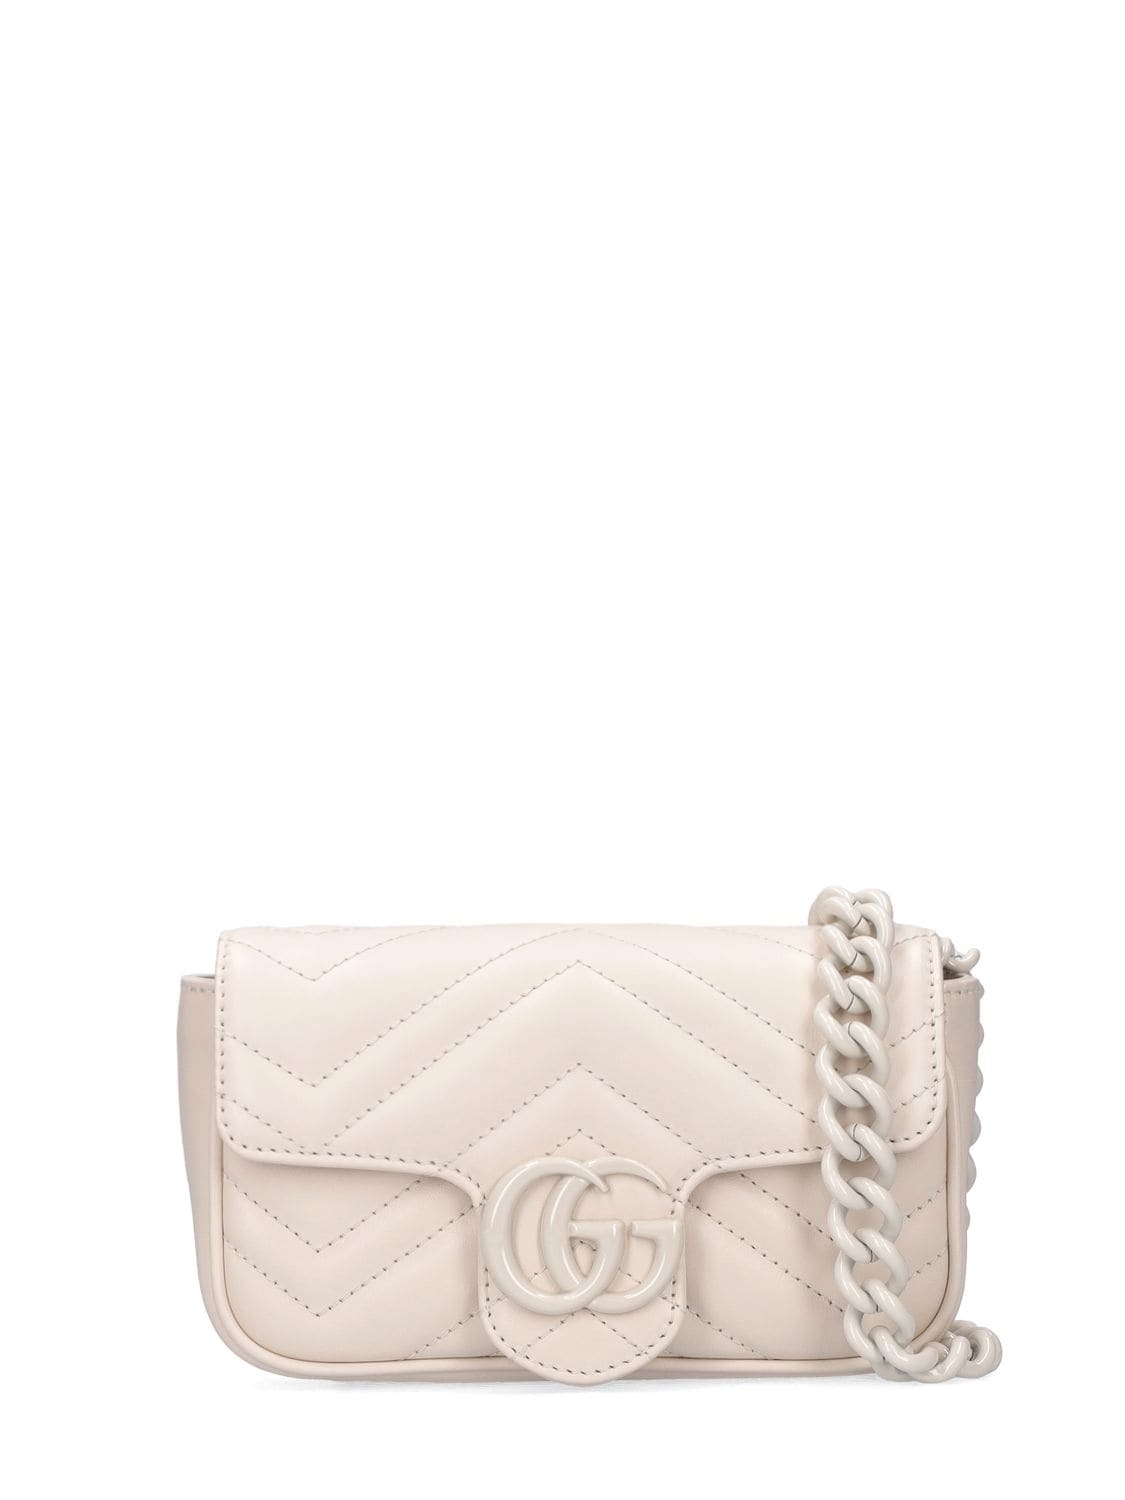 GUCCI Gg Marmont Leather Bag in white